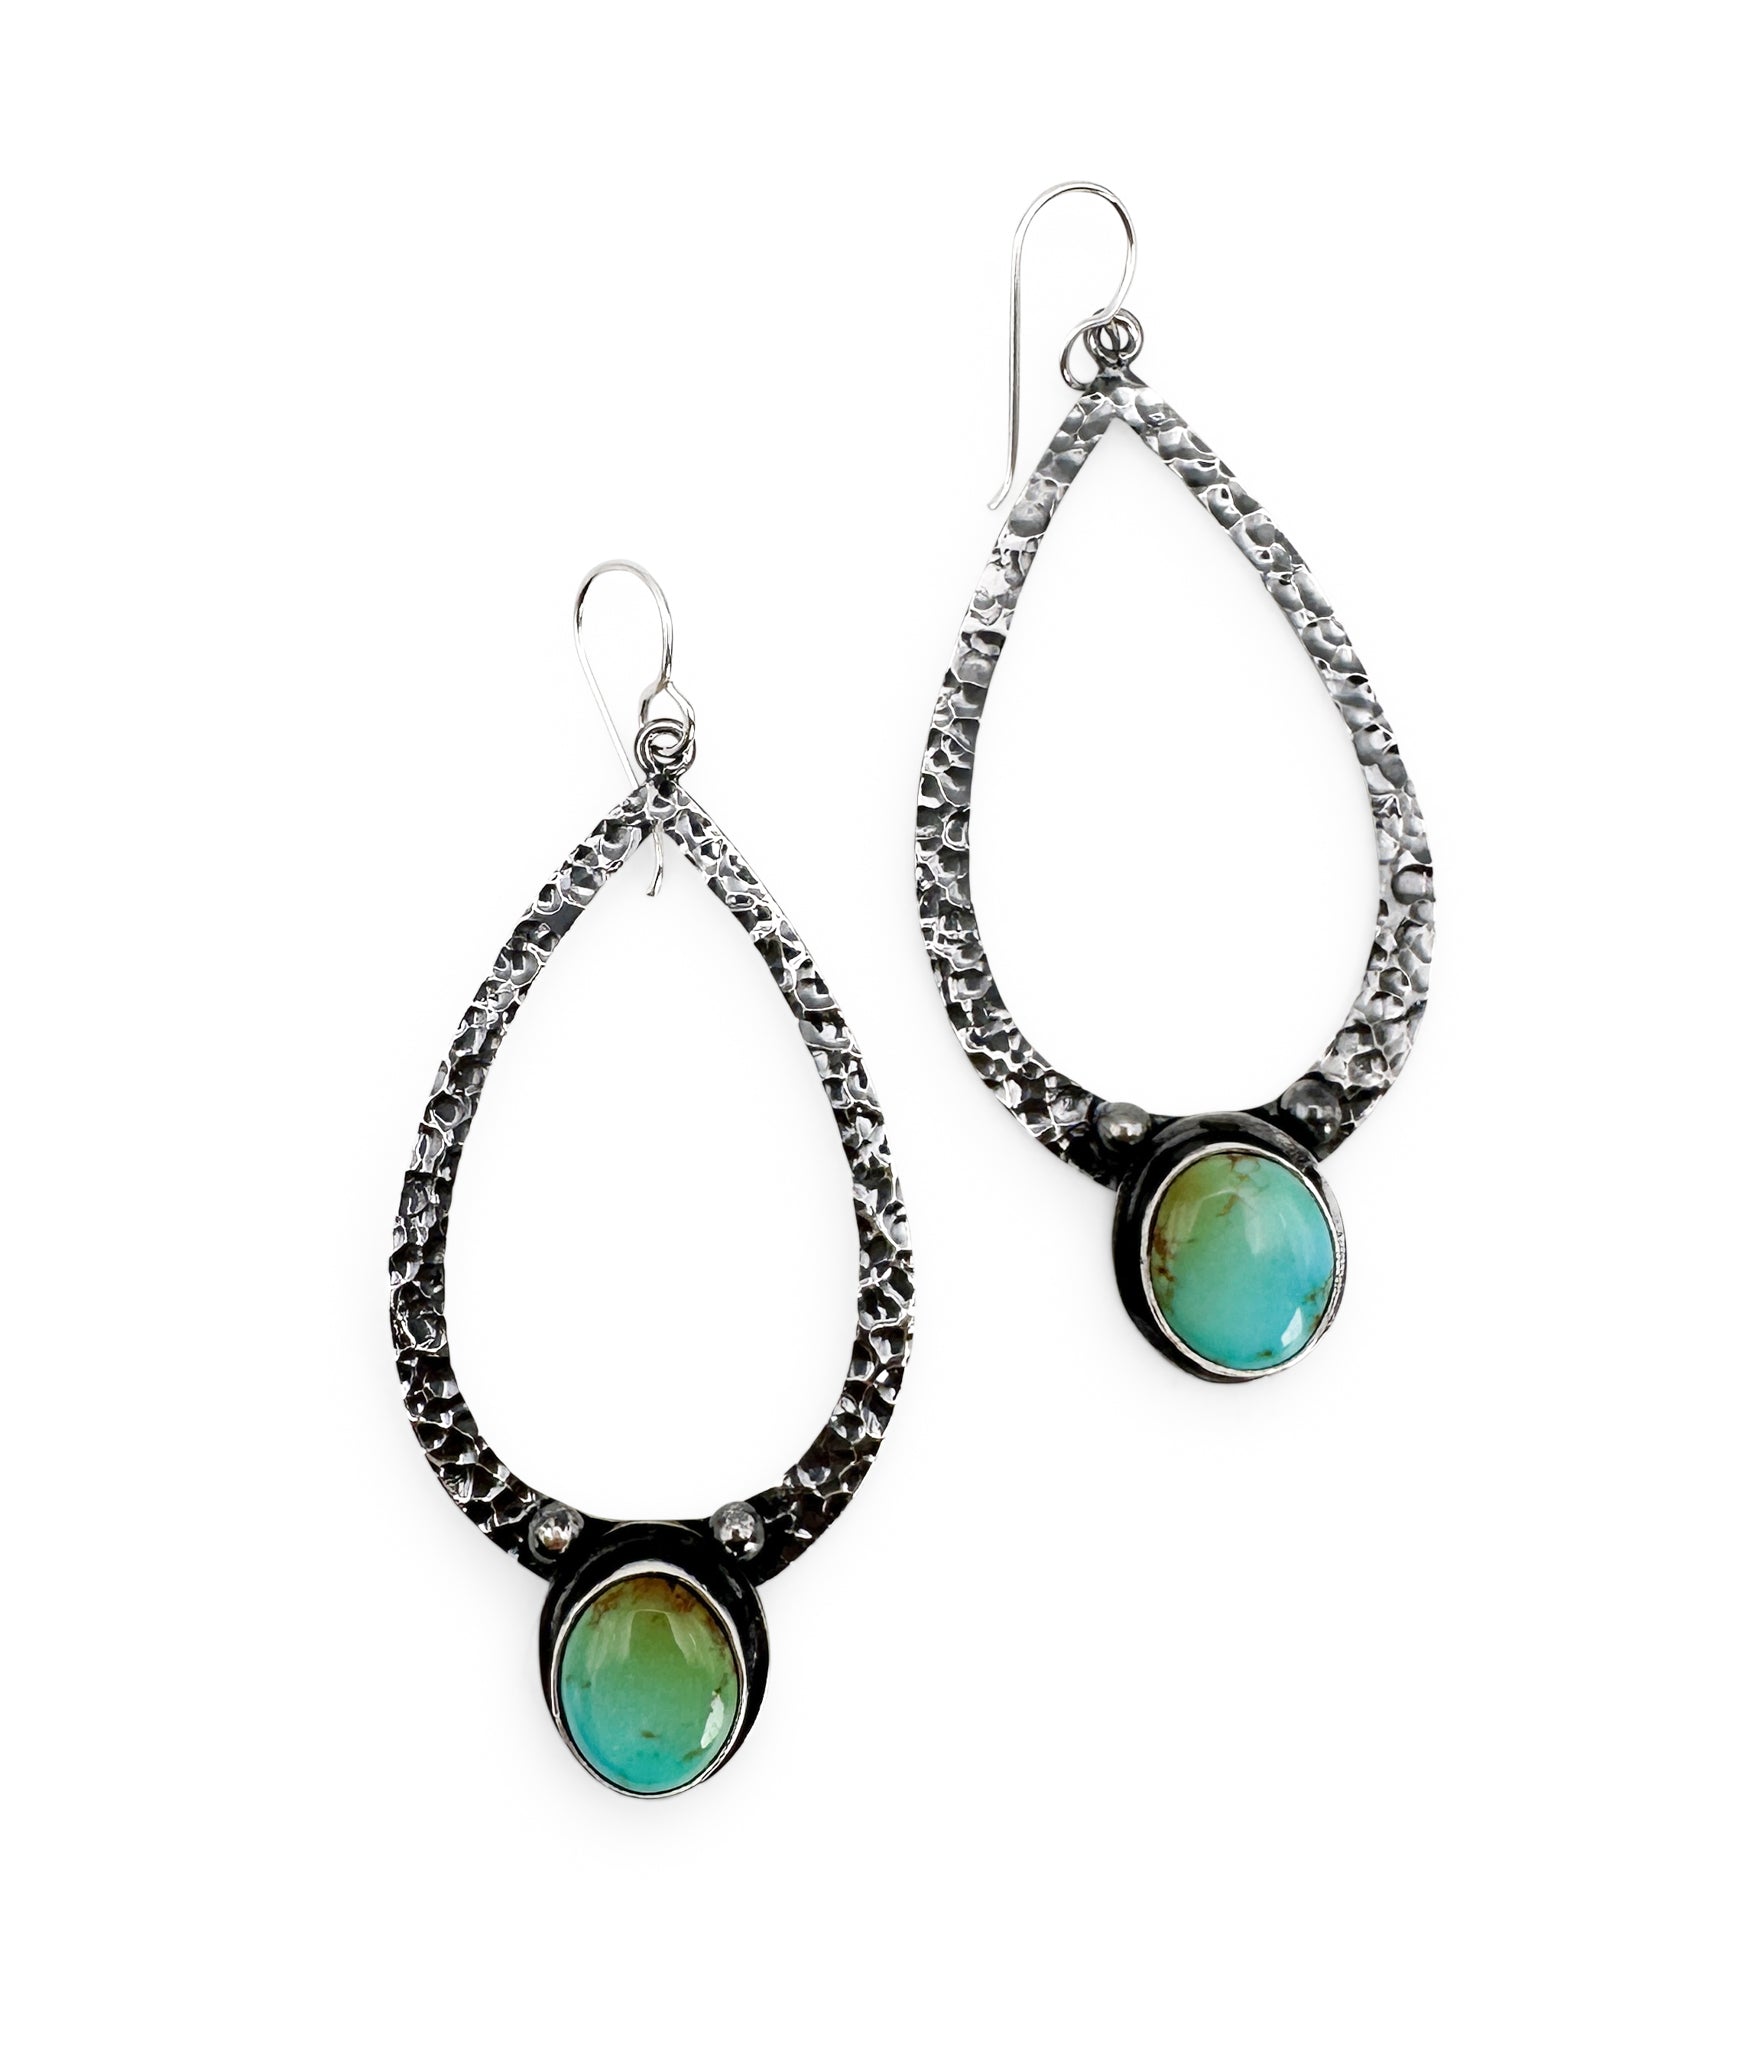 Vaughn Authentic Turquoise Hammered Earrings